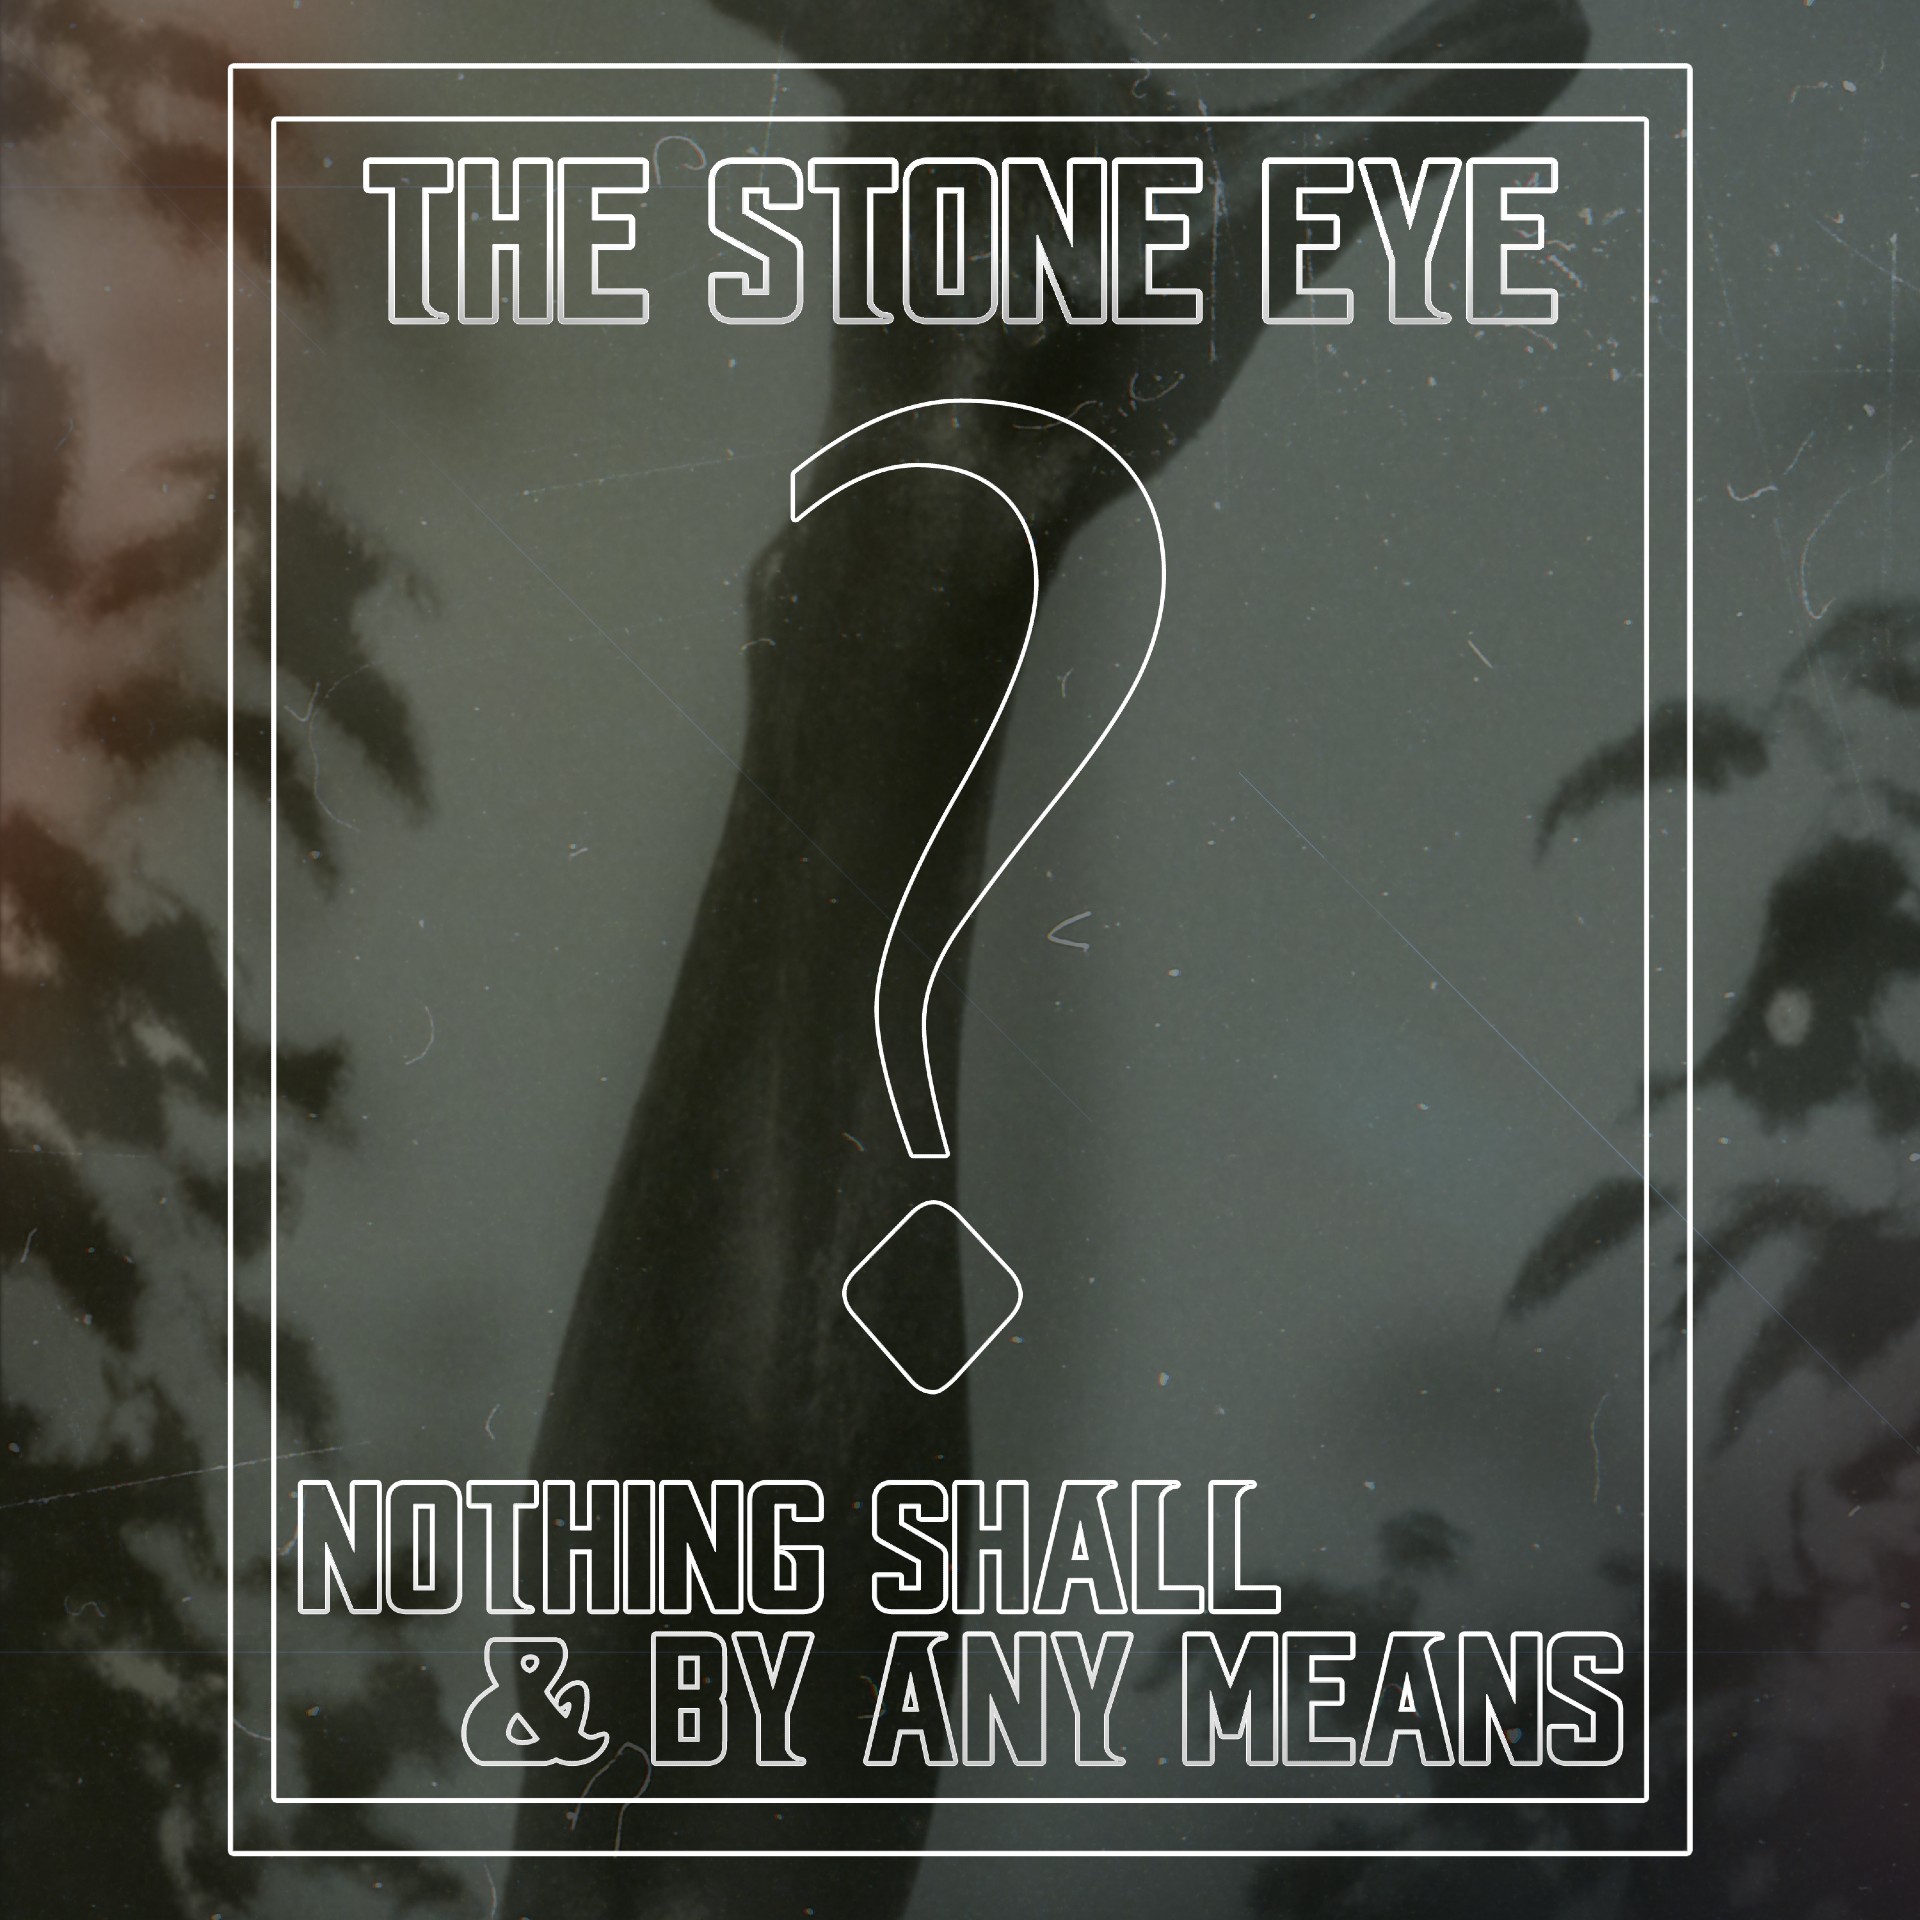 The Stone Eye “Nothing Shall’ & “By Any Means” single artwork